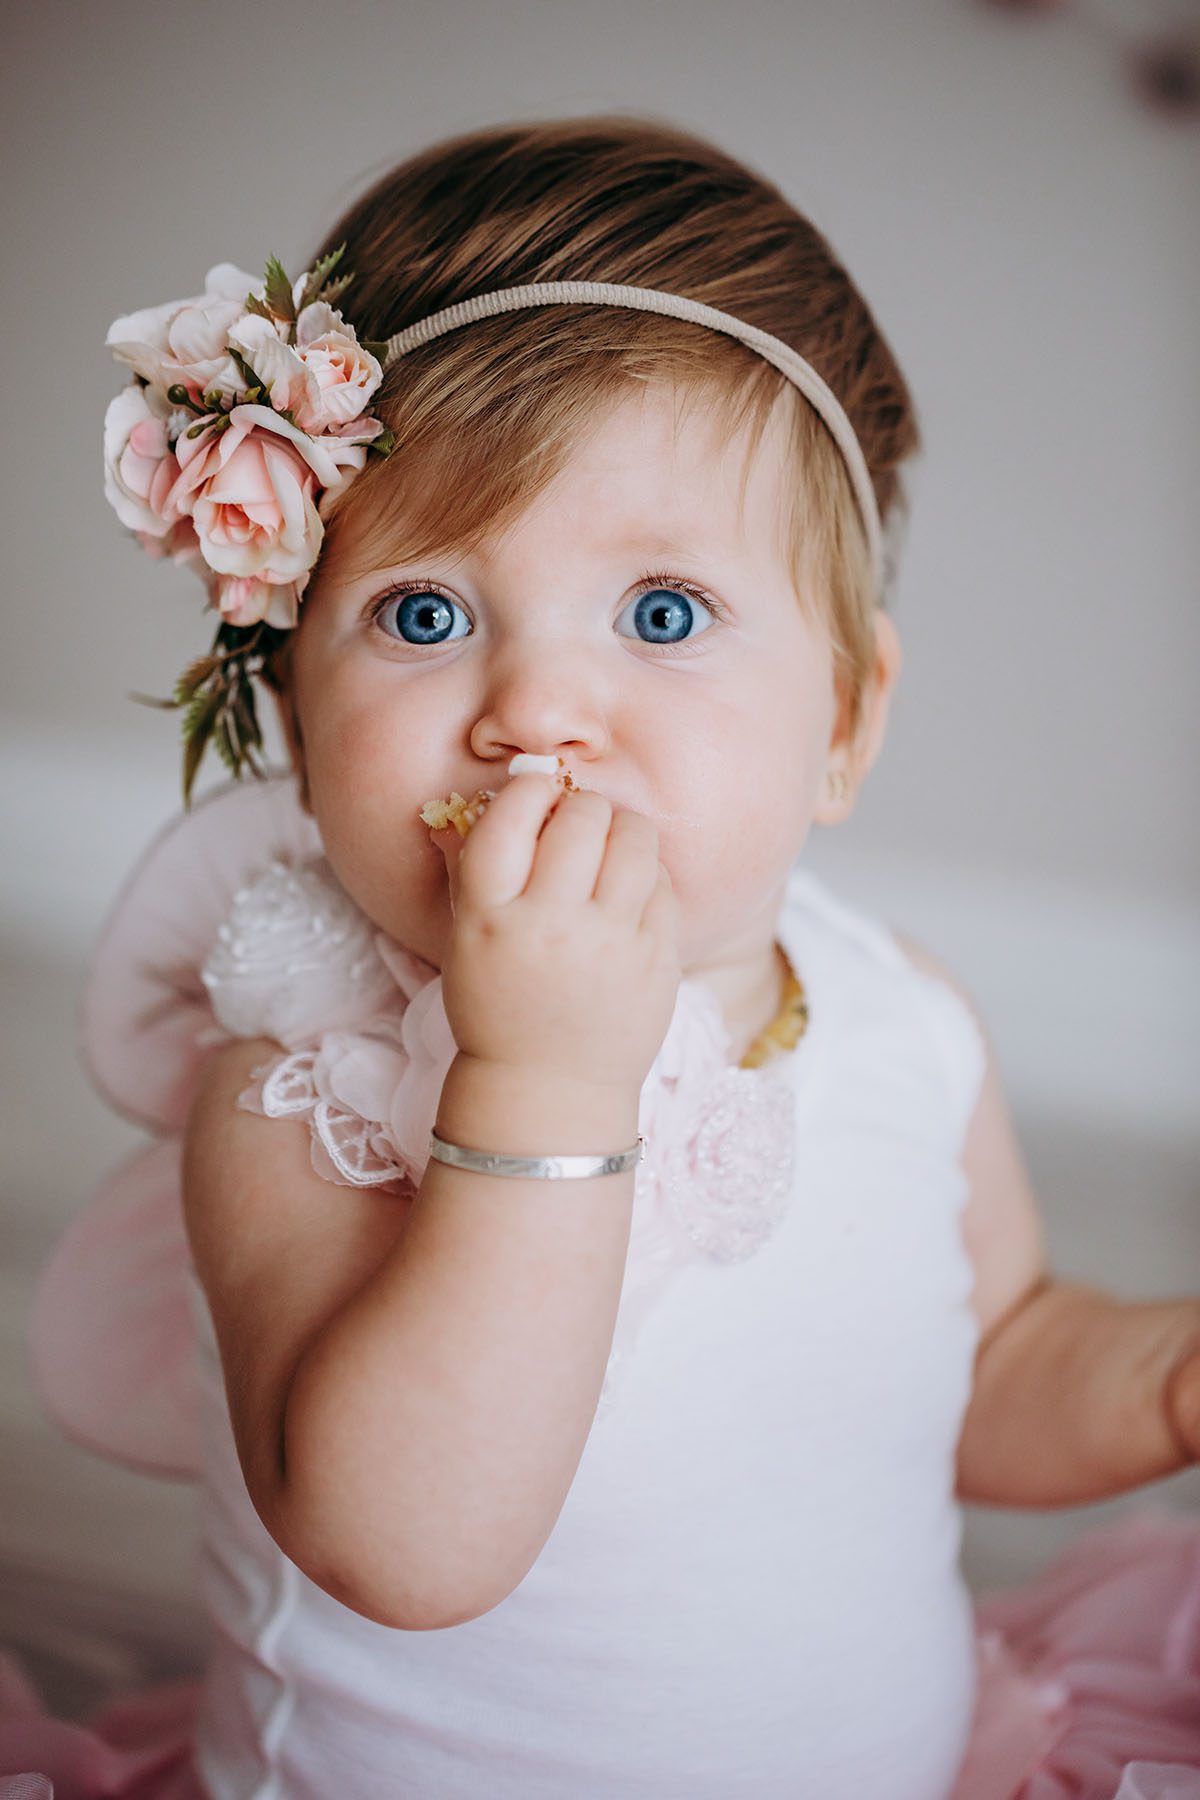 Little girl with blue eyes stuffs cake into her mouth